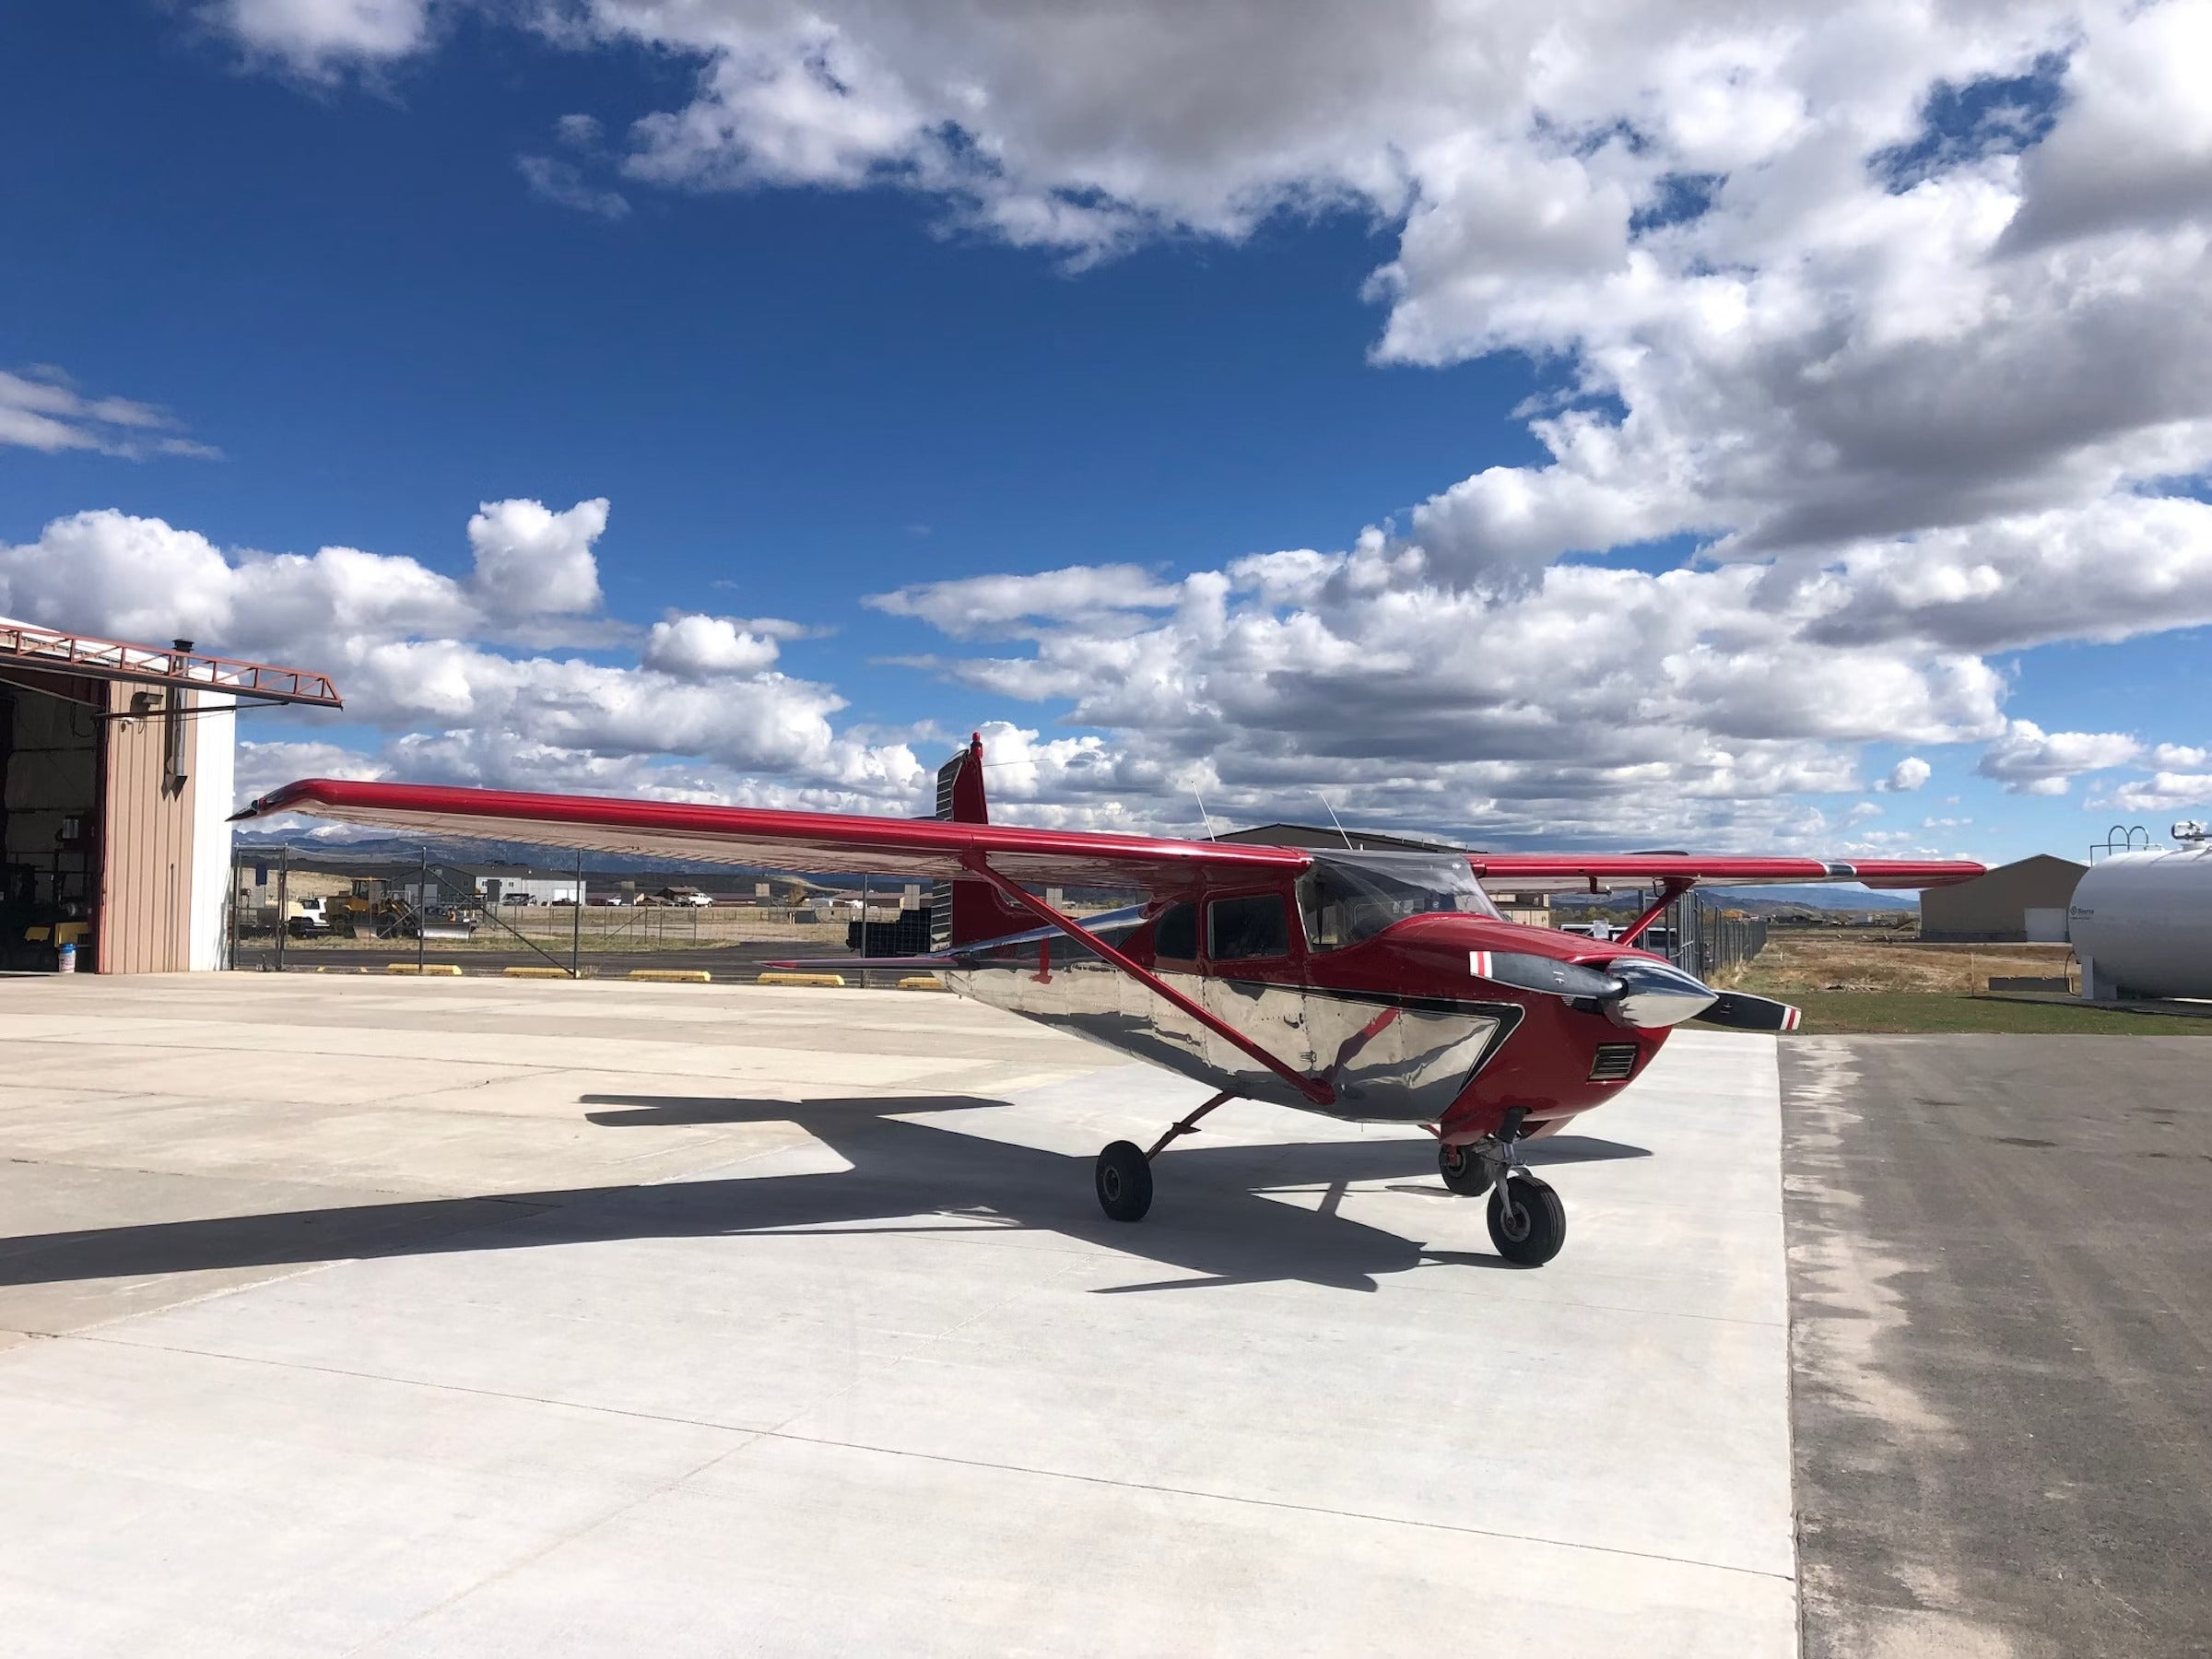 This 1958 Cessna 182B Skylane Is a Handsome, Straight-Tail ‘AircraftForSale’ Top Pick